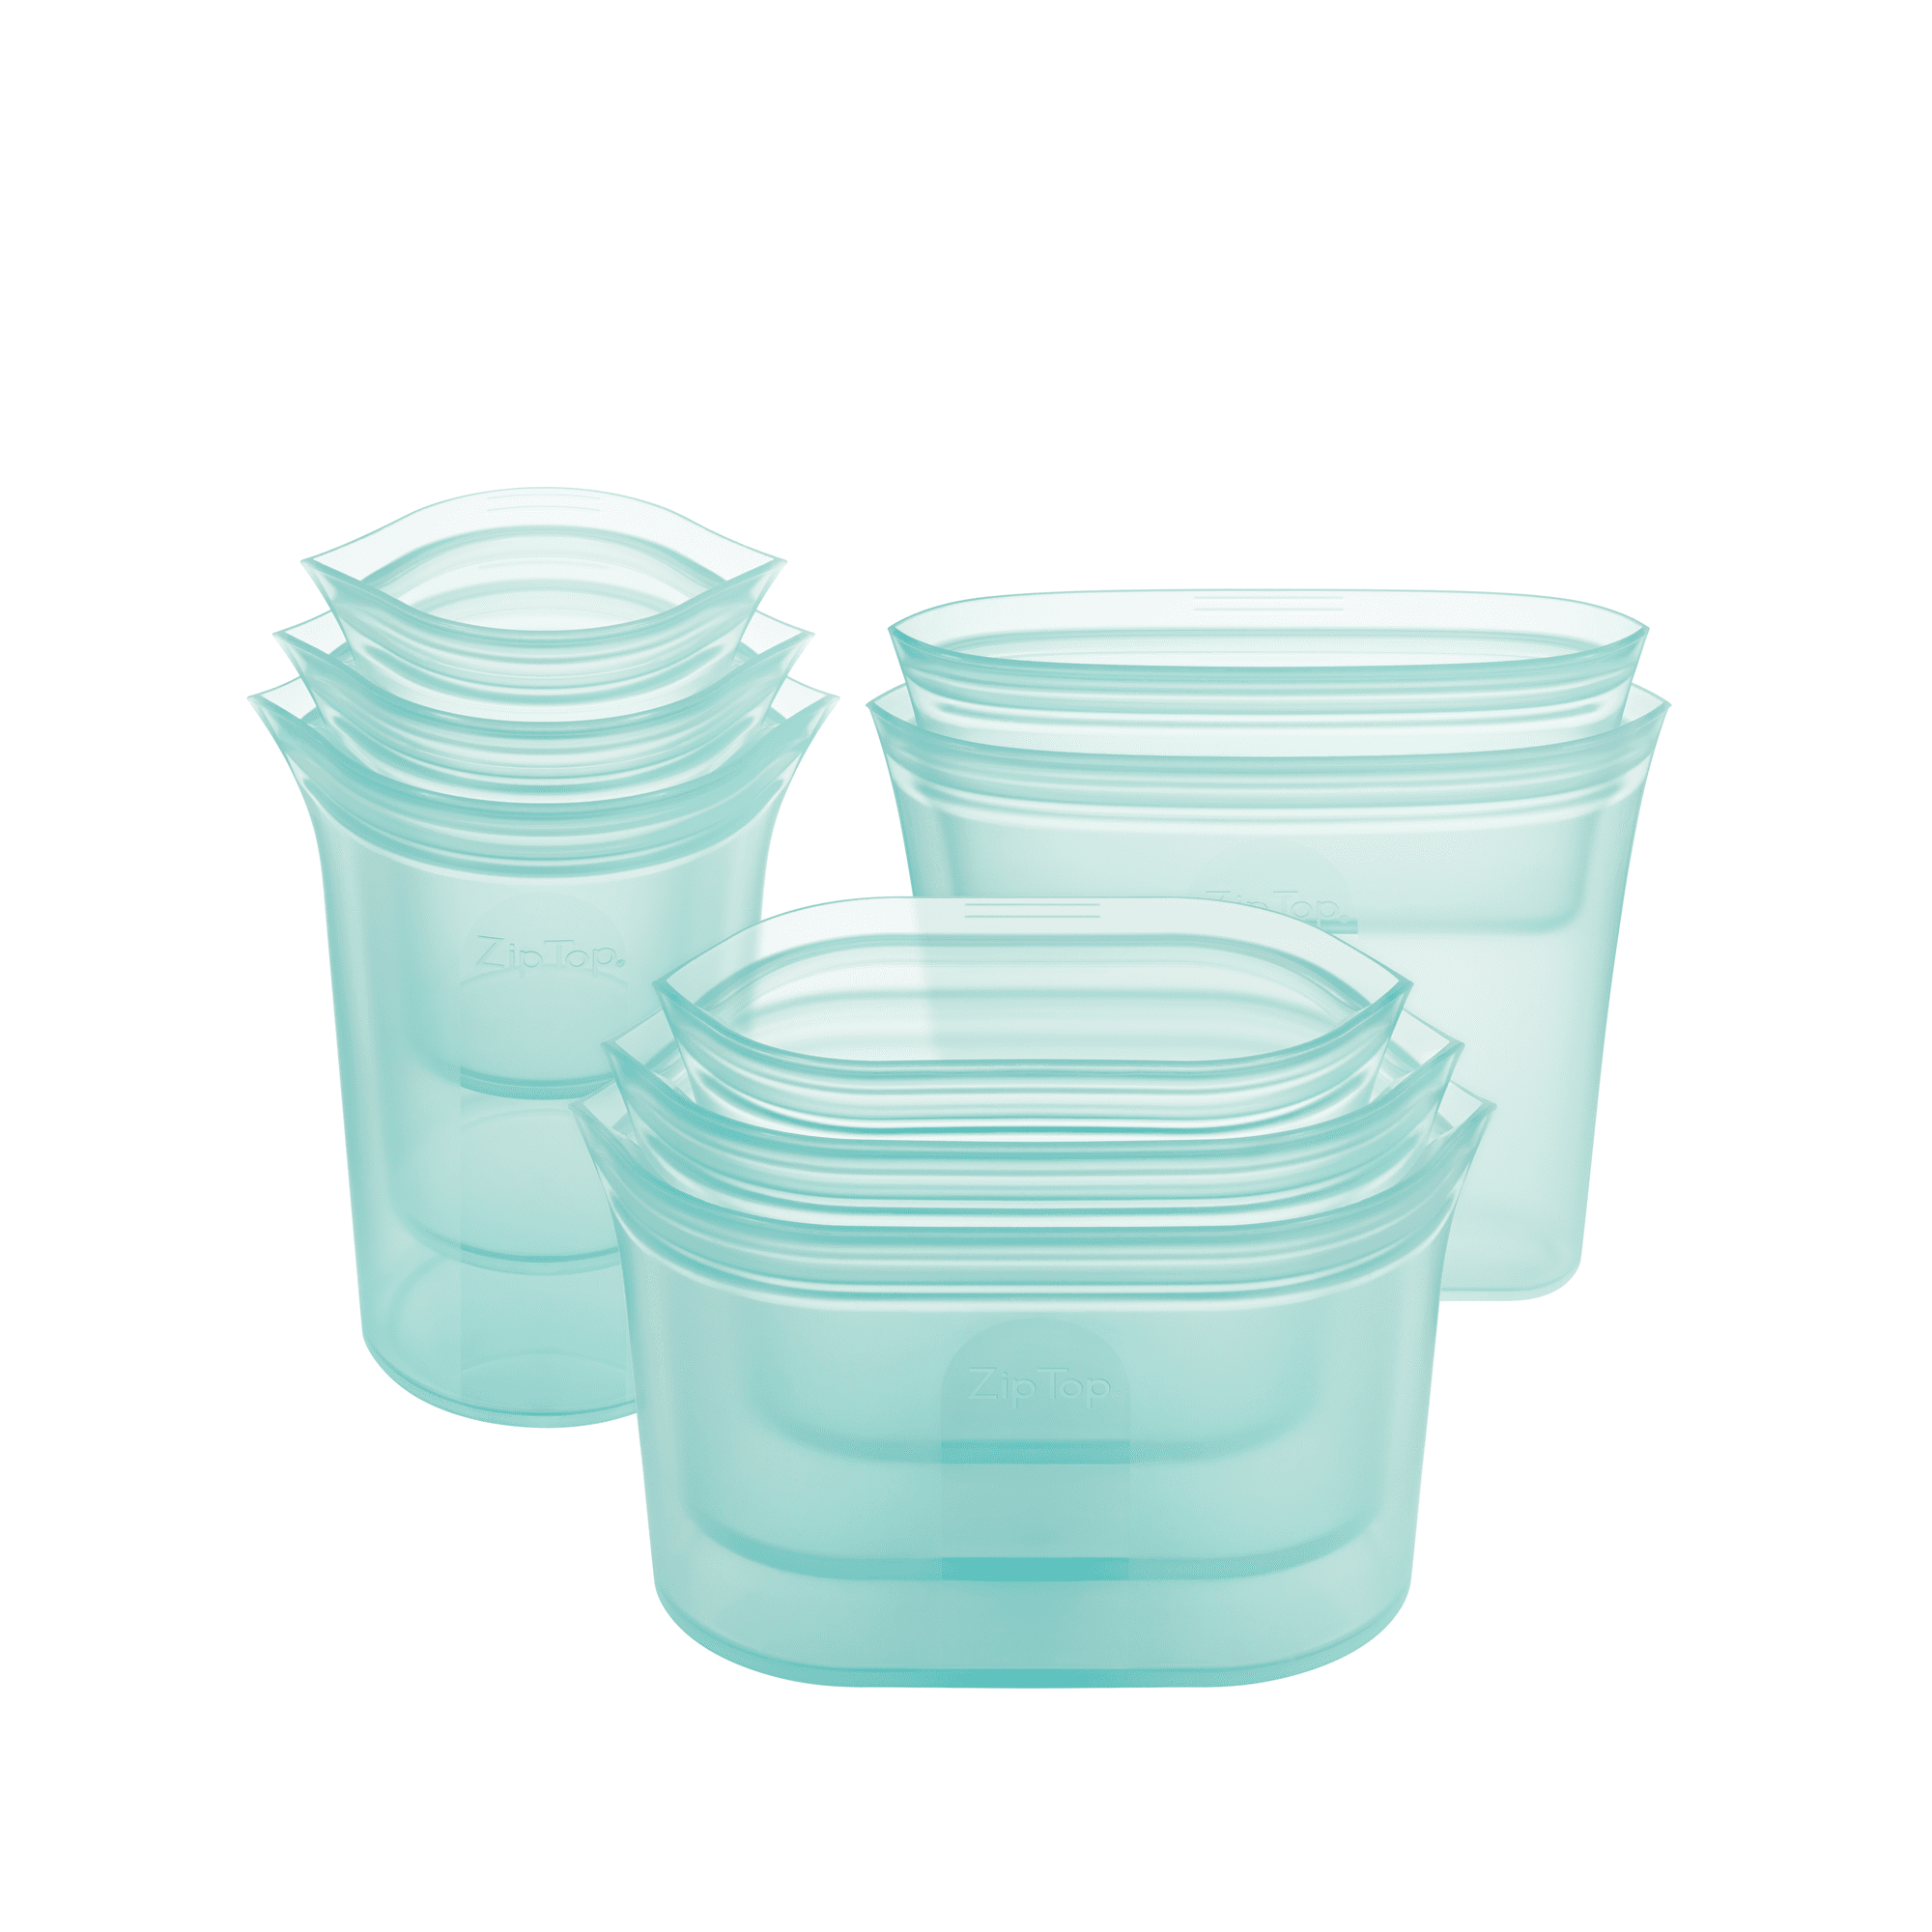 Rubbermaid Deviled Egg Easter Container Keeper Carrier Jumbo Eggs Food Storage 